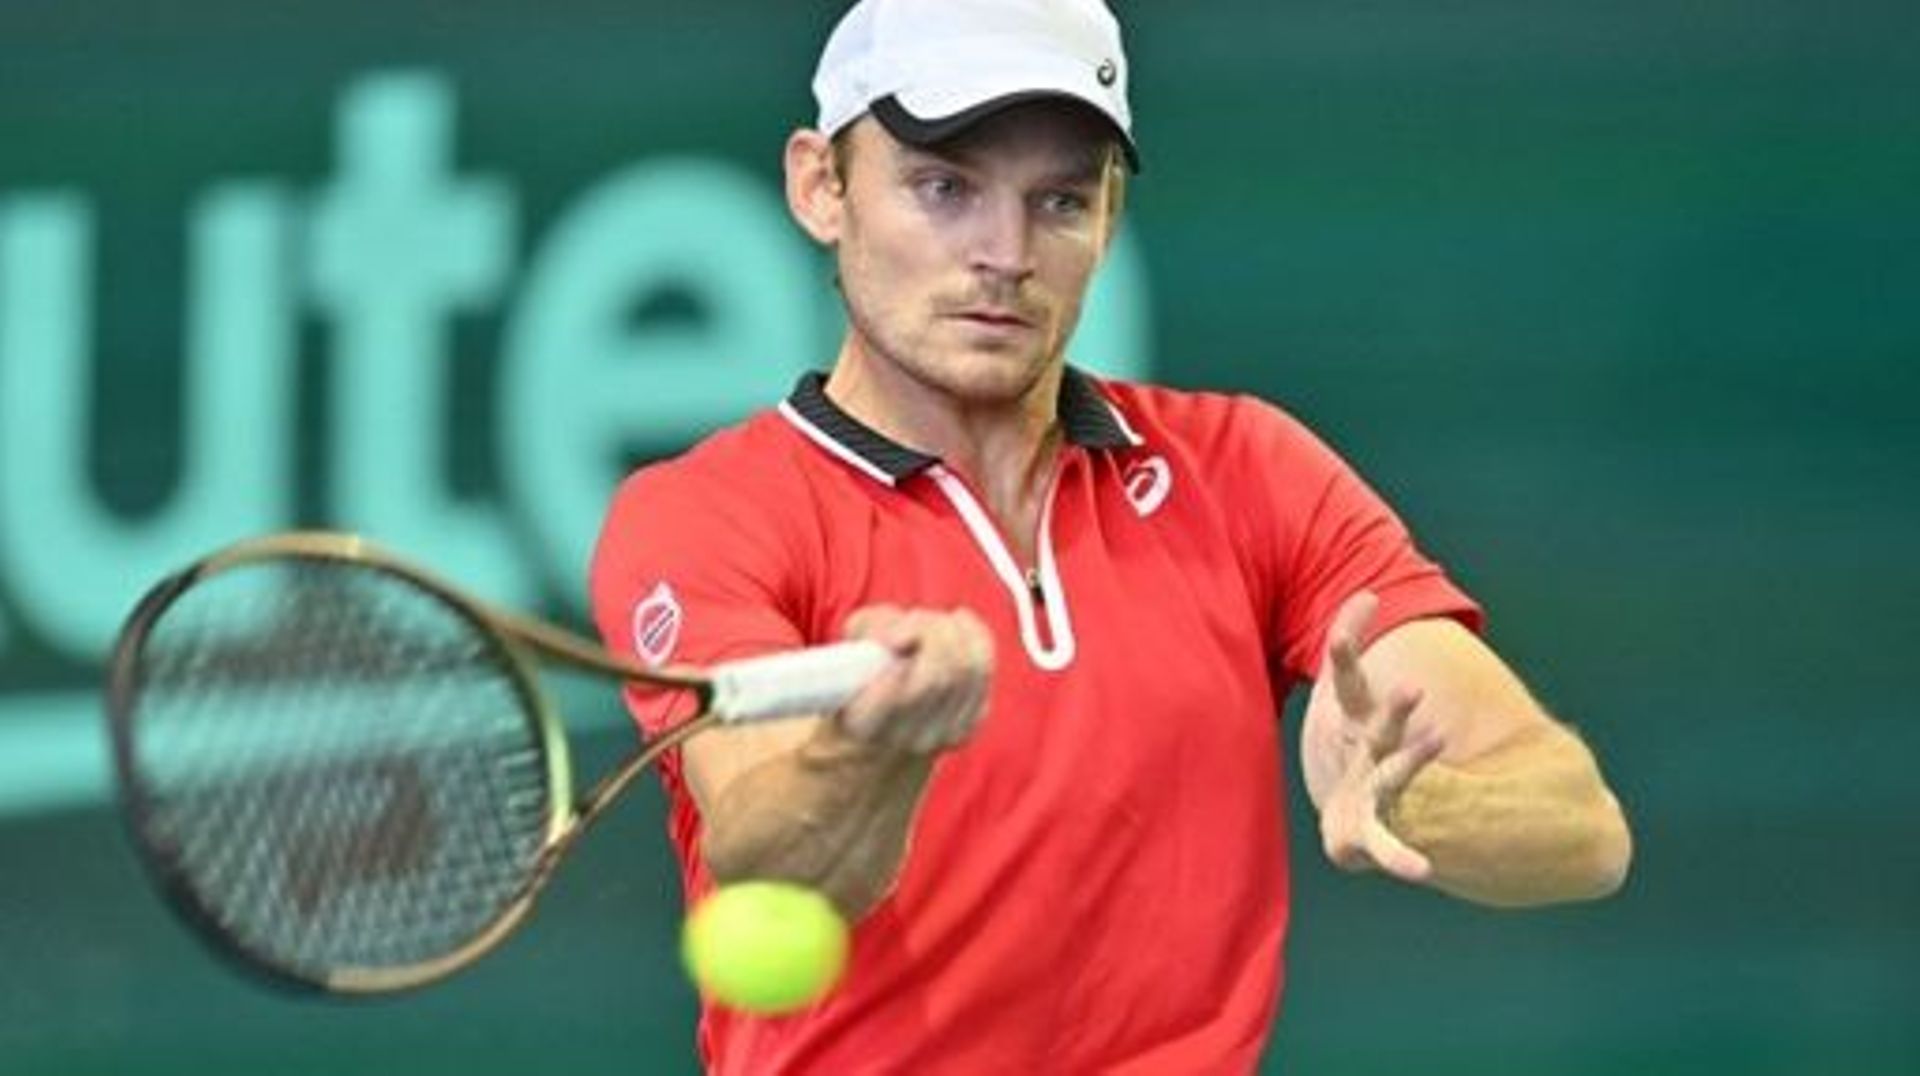 Belgium’s David Goffin returns the ball against South Korea’s Kwon Soon-woo during their singles match of the Davis Cup tennis qualifiers first round between South Korea and Belgium in Seoul on February 5, 2023. Jung Yeon-je / AFP